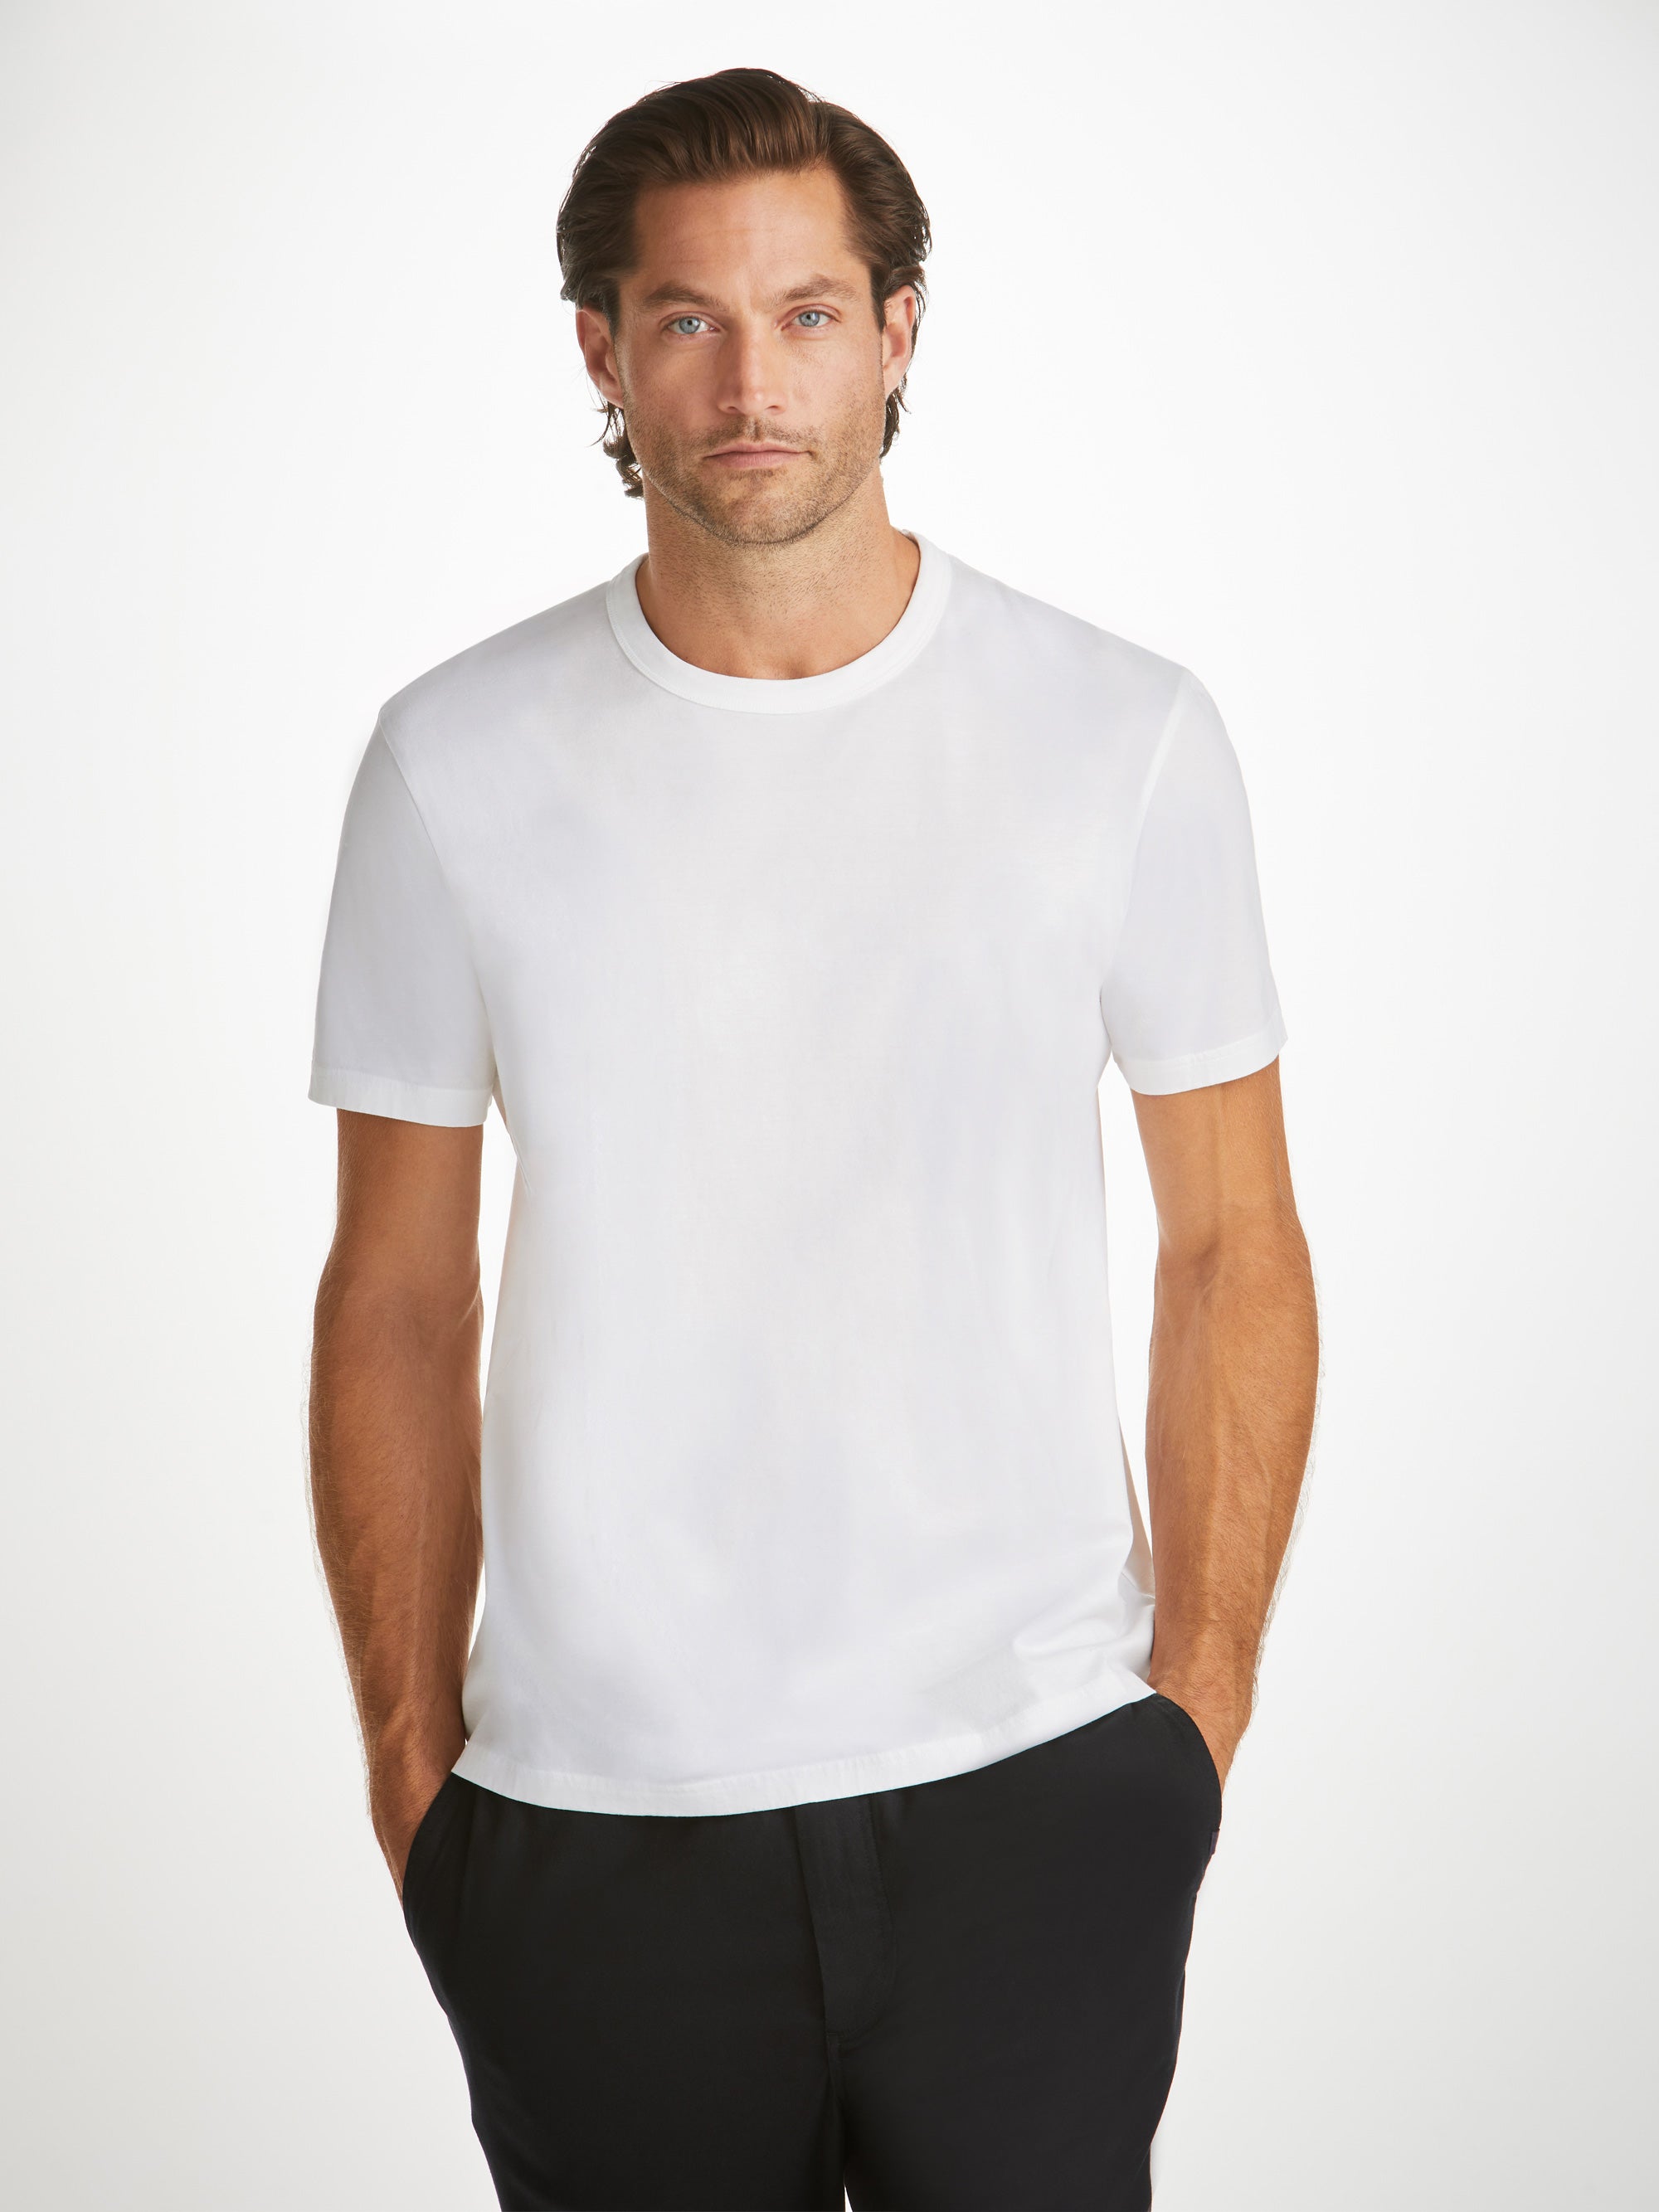 Shop Branded Luxury Men's T-Shirts From Top Designers